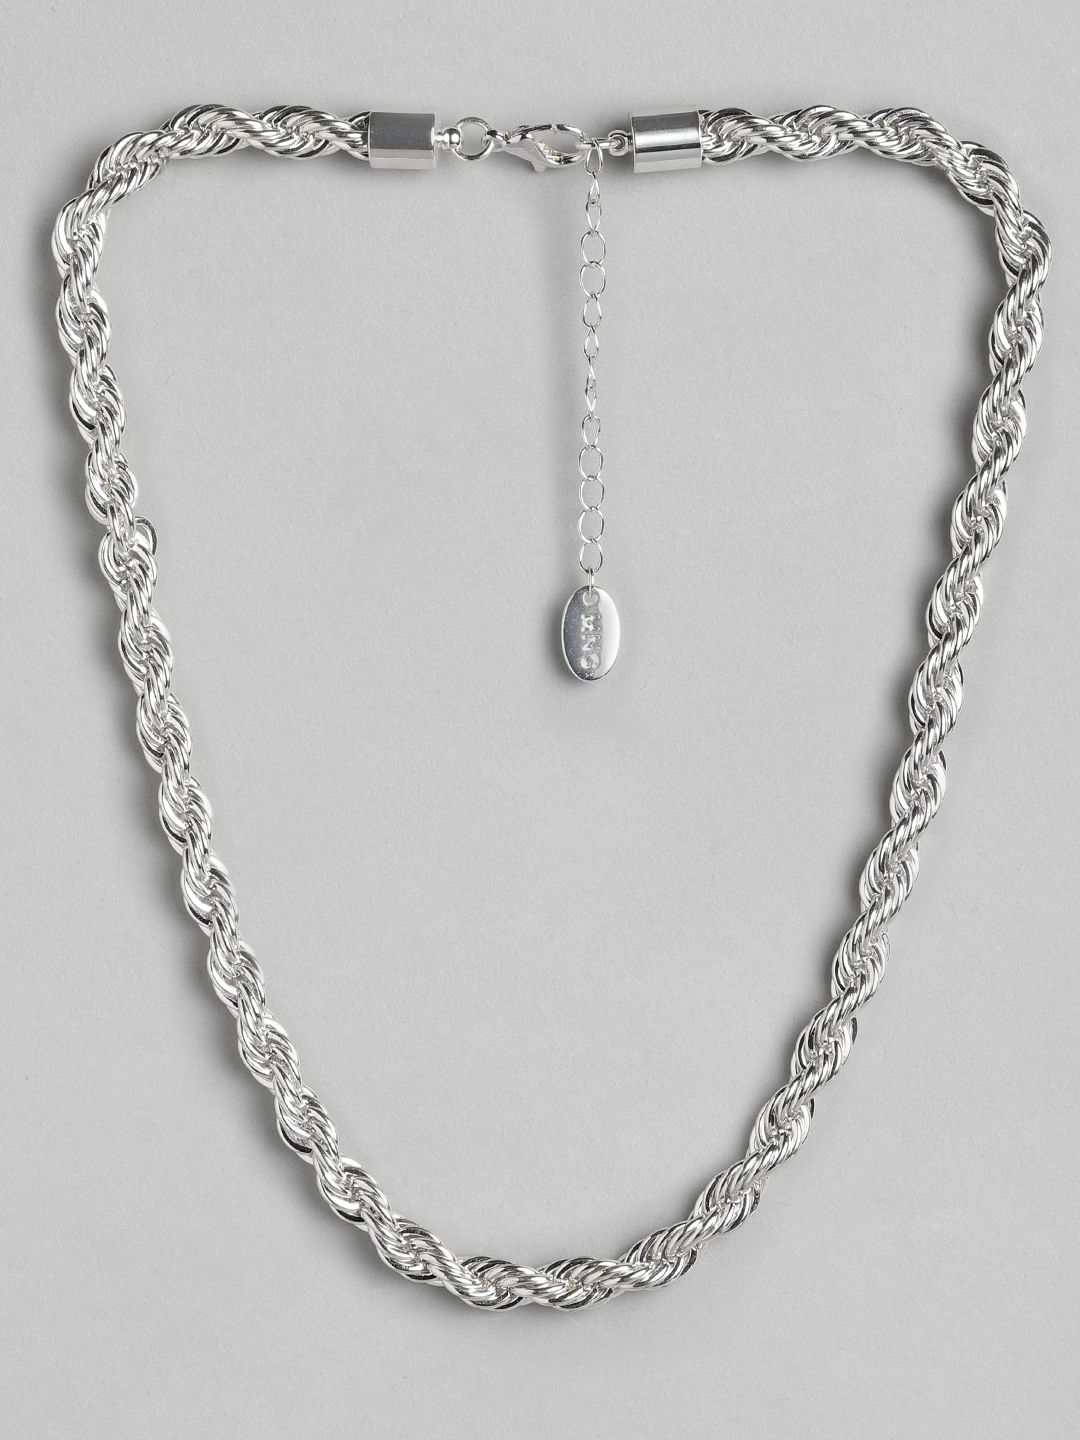 MANGO Silver-Toned Twisted Chain Necklace Price in India